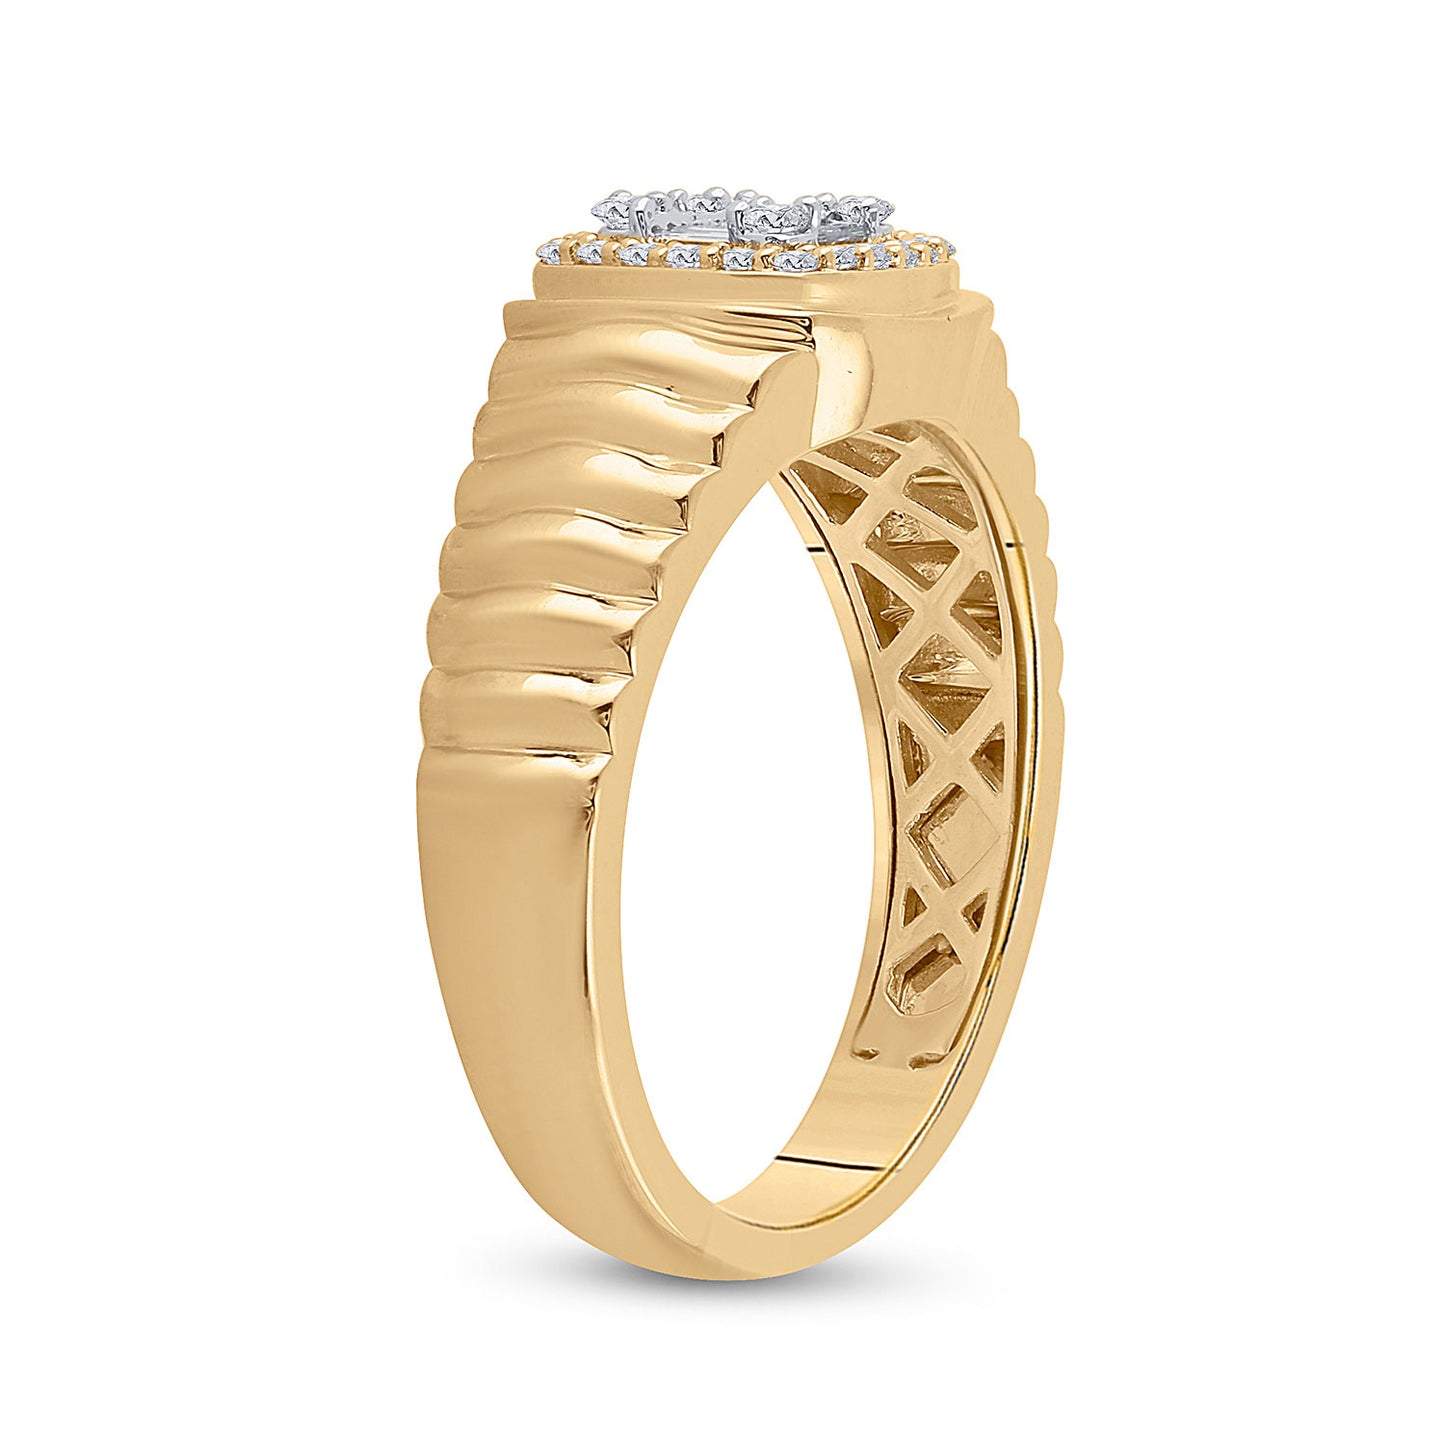 14kt Yellow Gold Mens Baguette Round Diamond Square Ring 1/3 Cttw